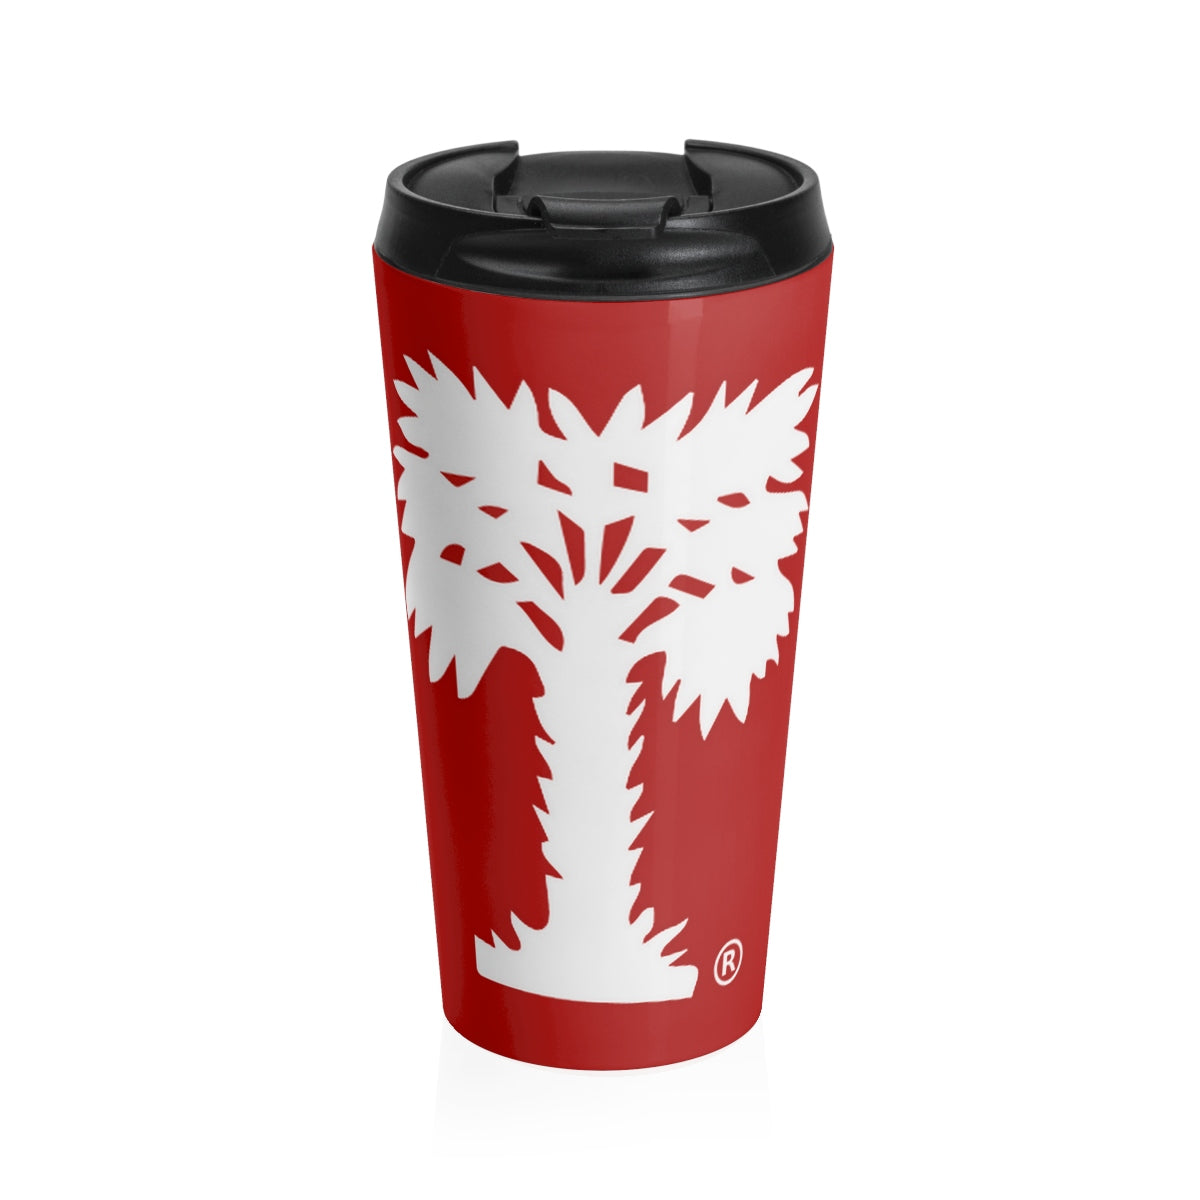 Class of 1987 Big Red Stainless Steel Travel Mug